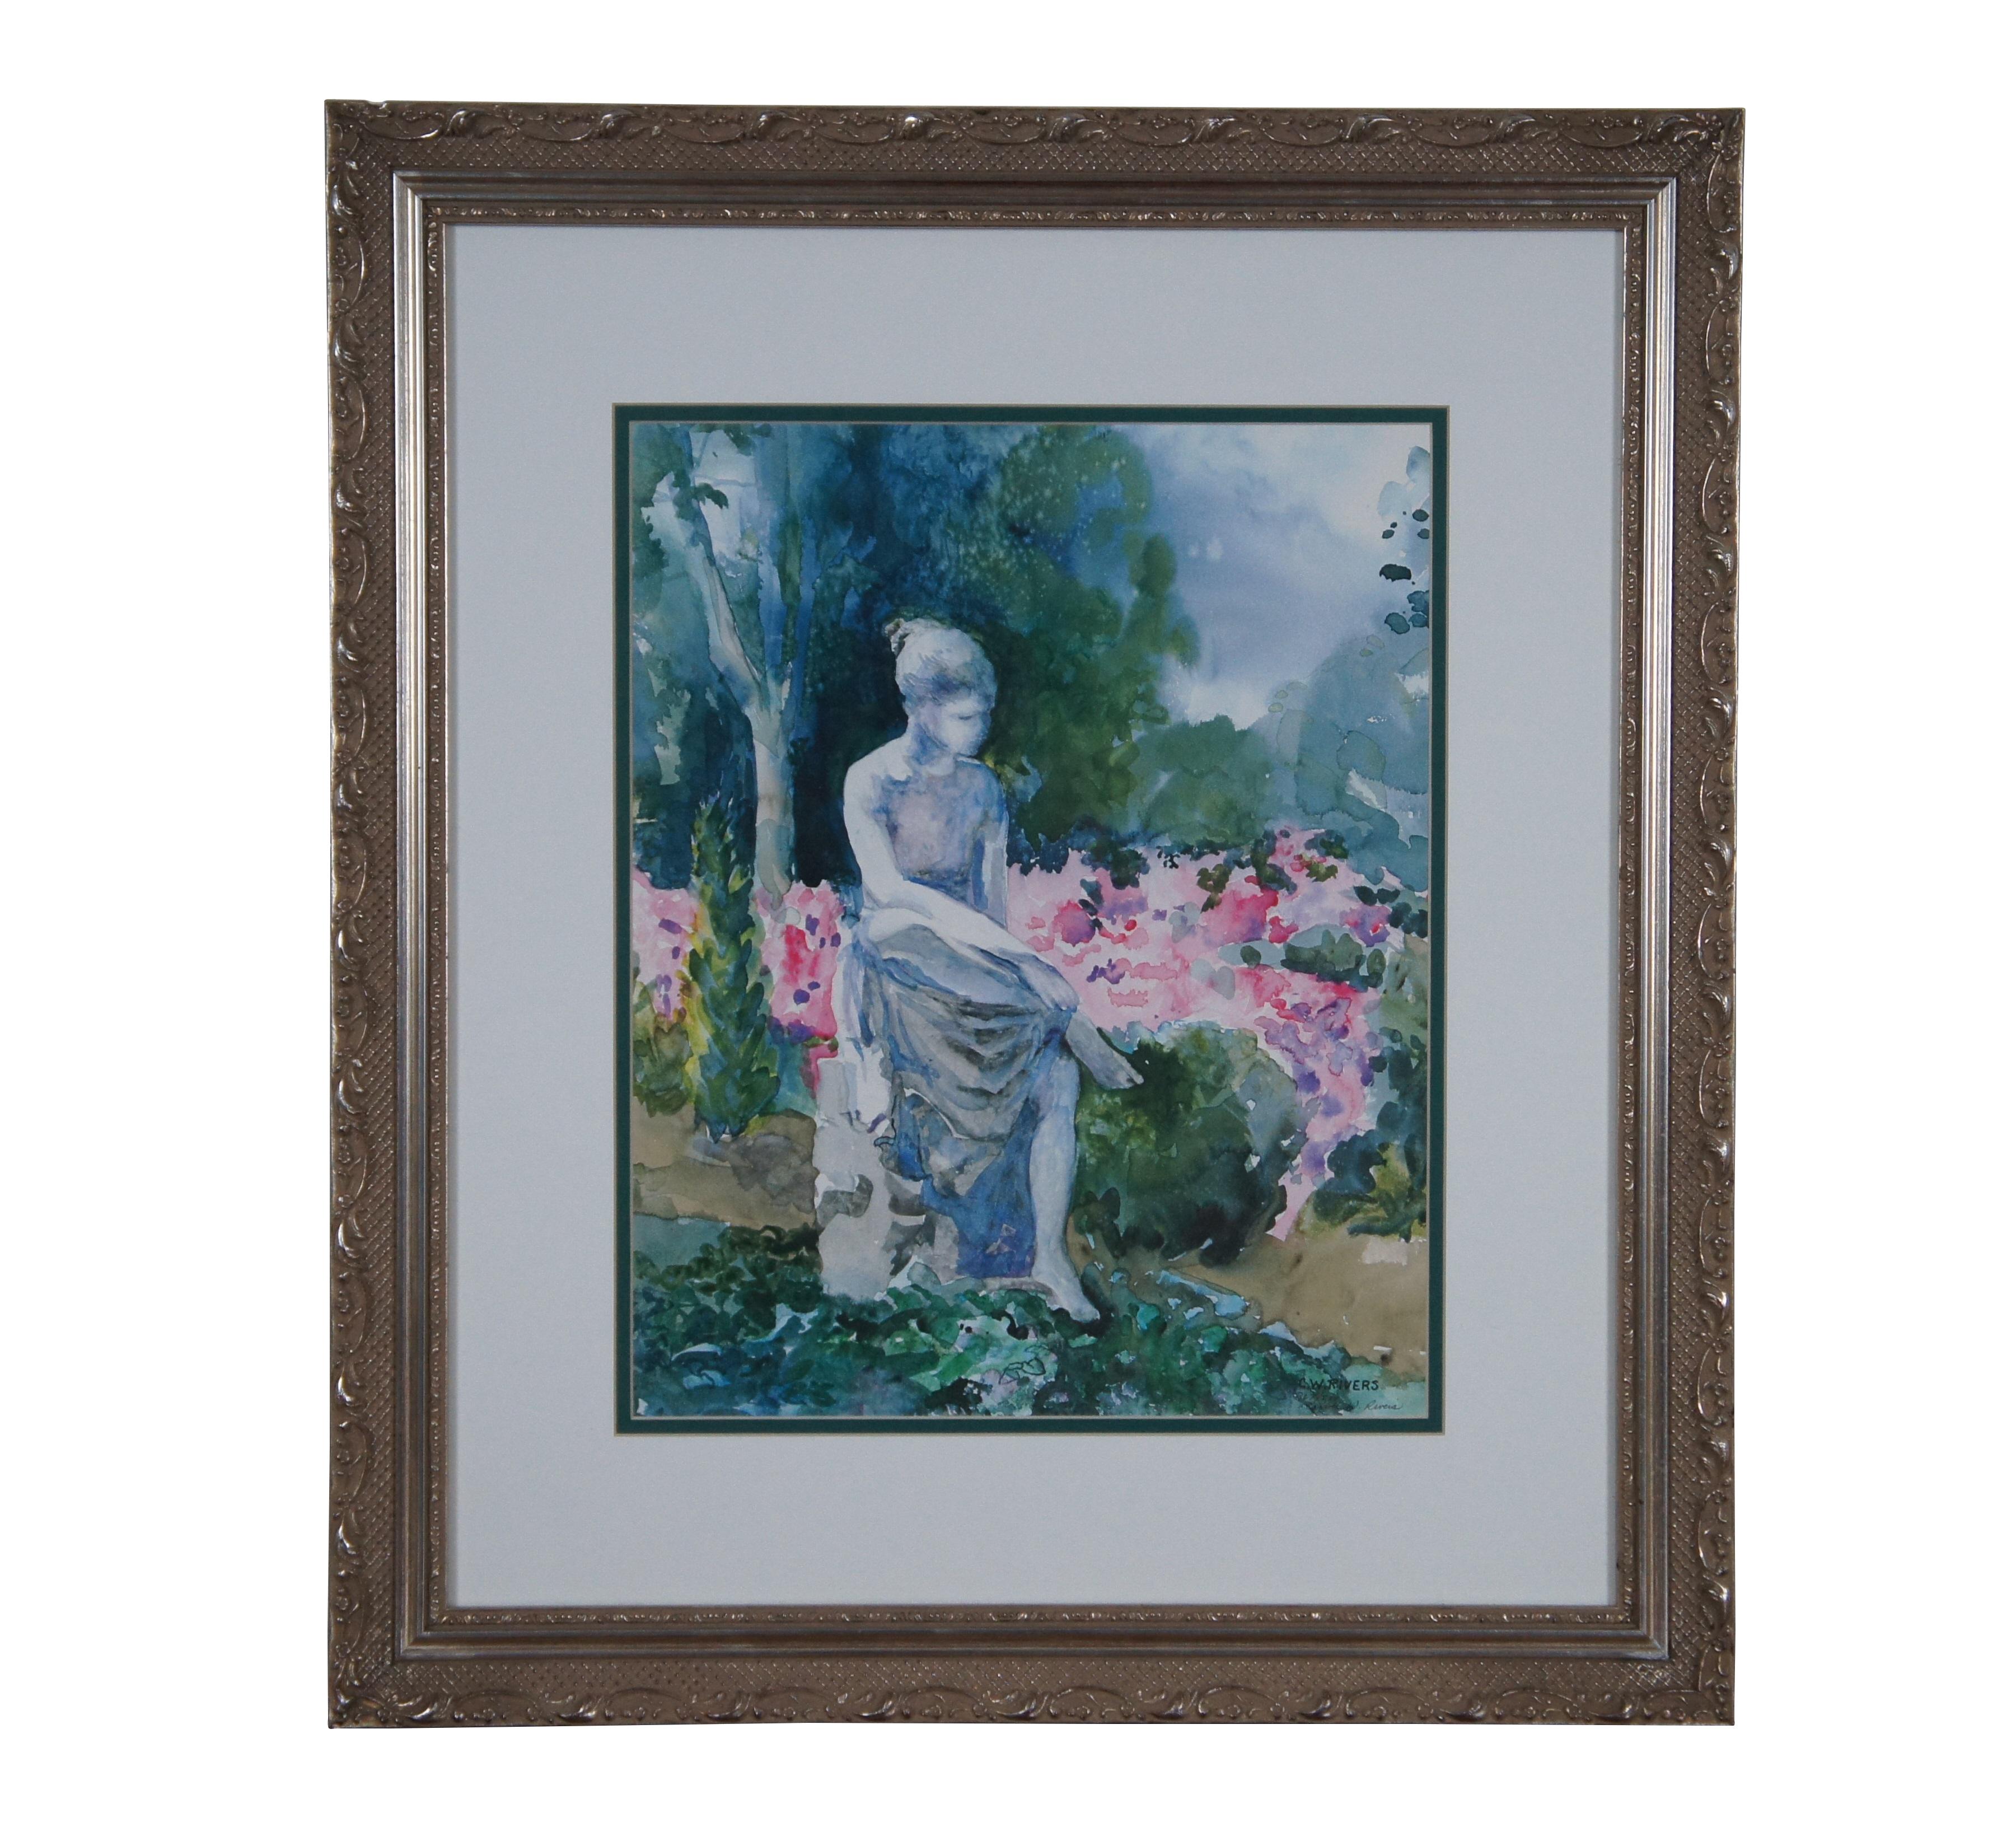 2 Middleton Place Wood Nymph Statue Framed Lithograph & Poster Print In Good Condition For Sale In Dayton, OH